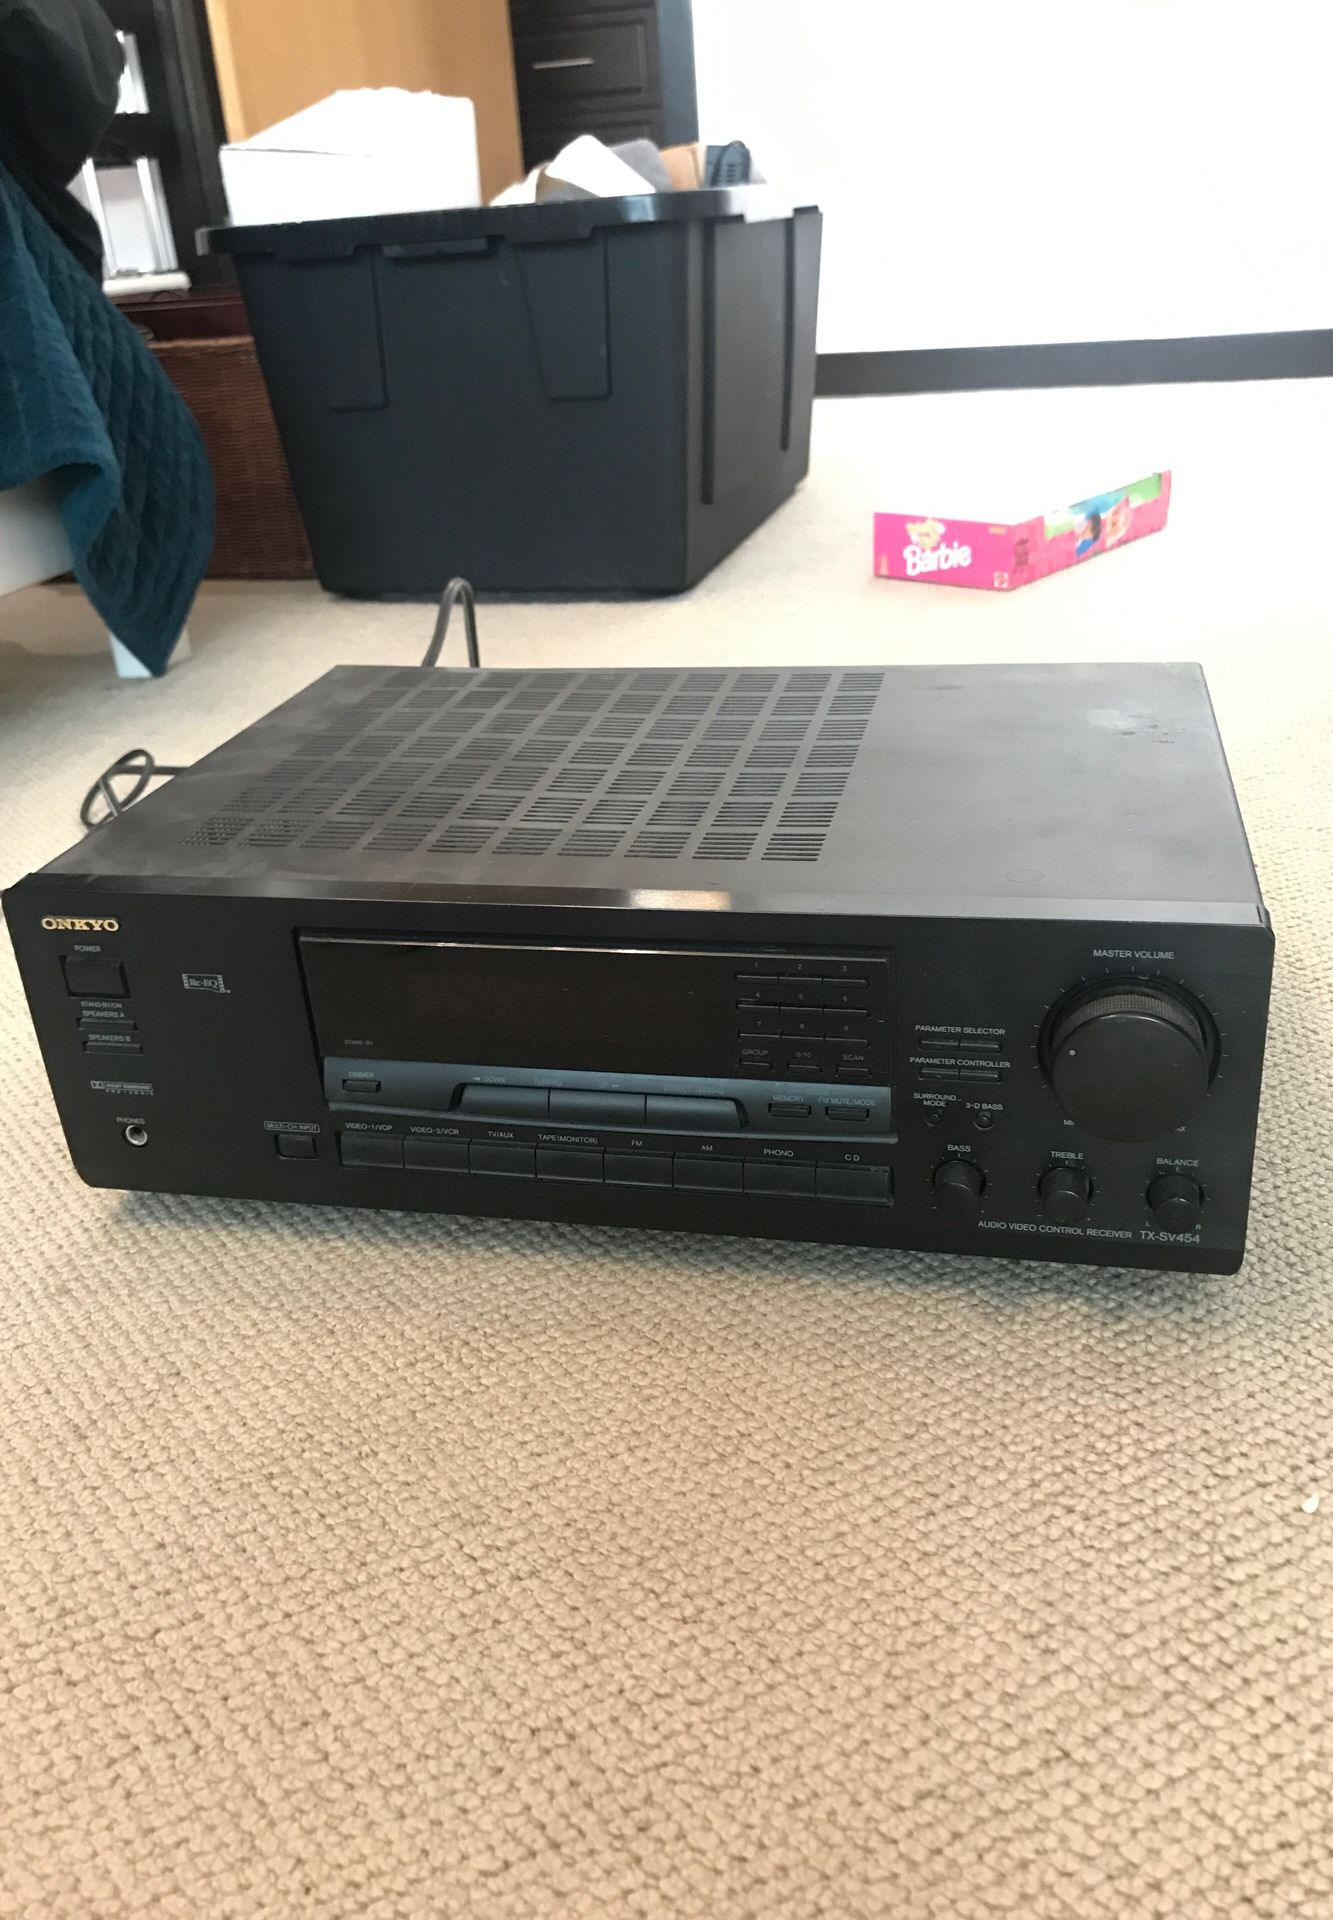 Onkyo TX-SV454 5.1 Dolby surround receiver with phono